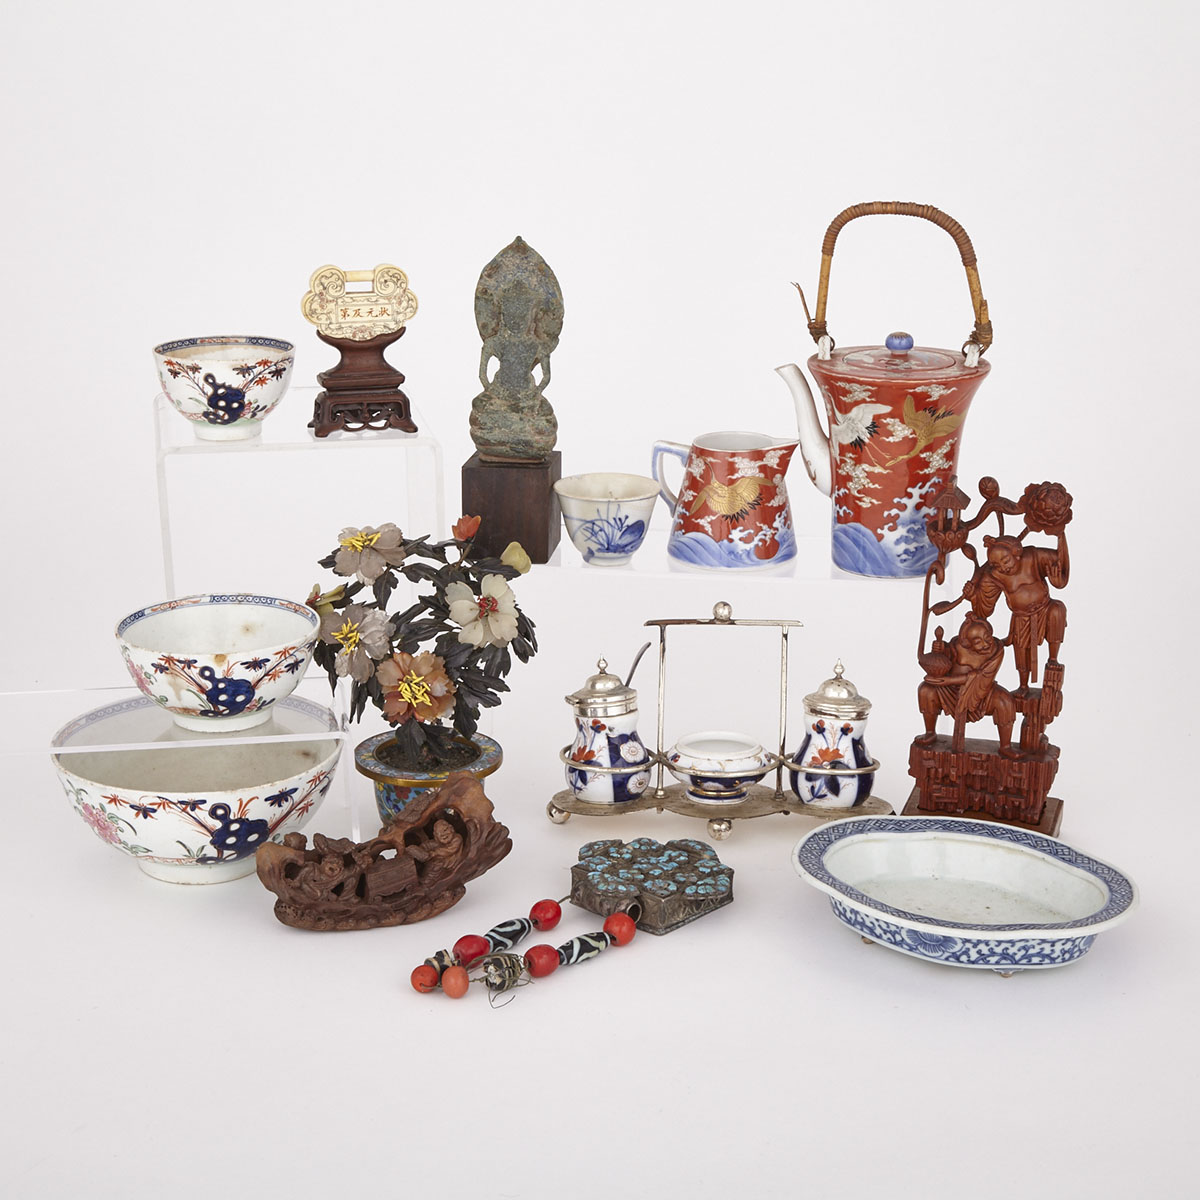 Group of Asian Wares, Early to Mid-20th Century